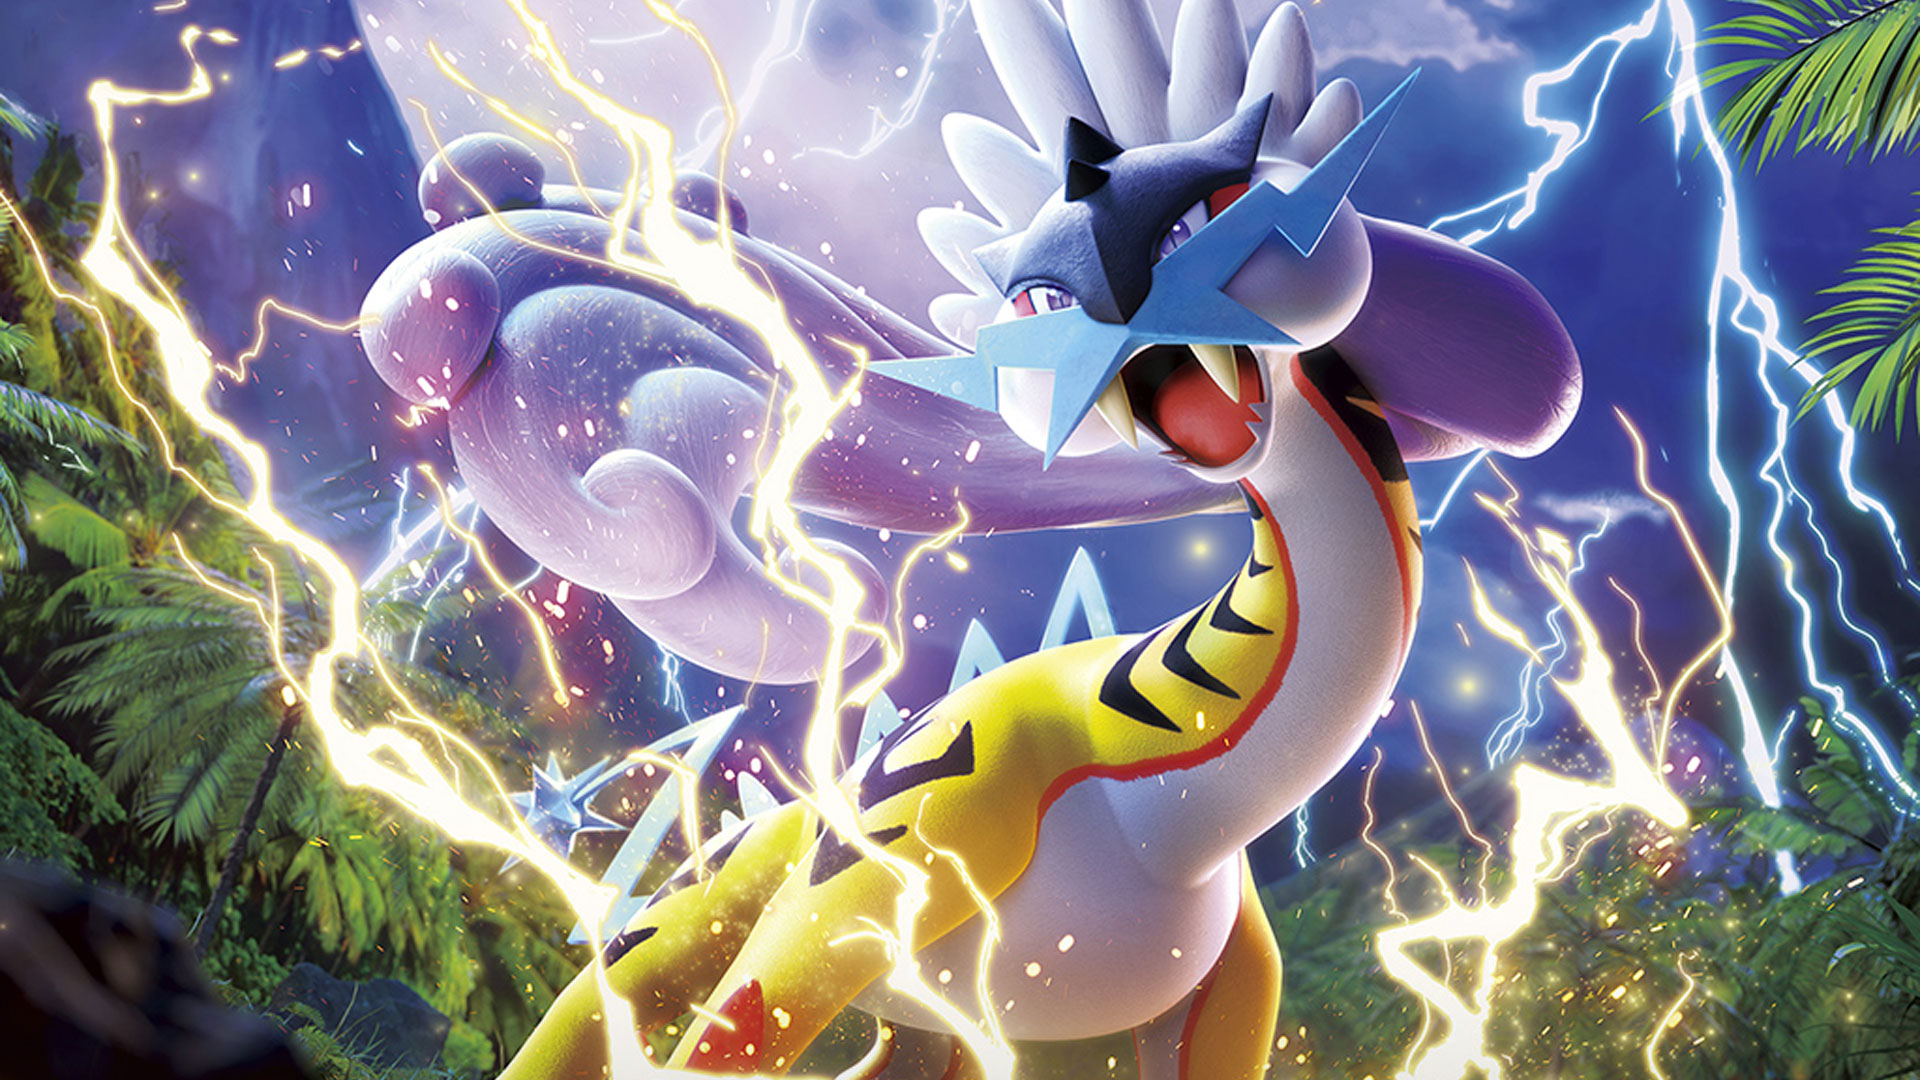 Raging Bolt from Pokémon Temporal Forces